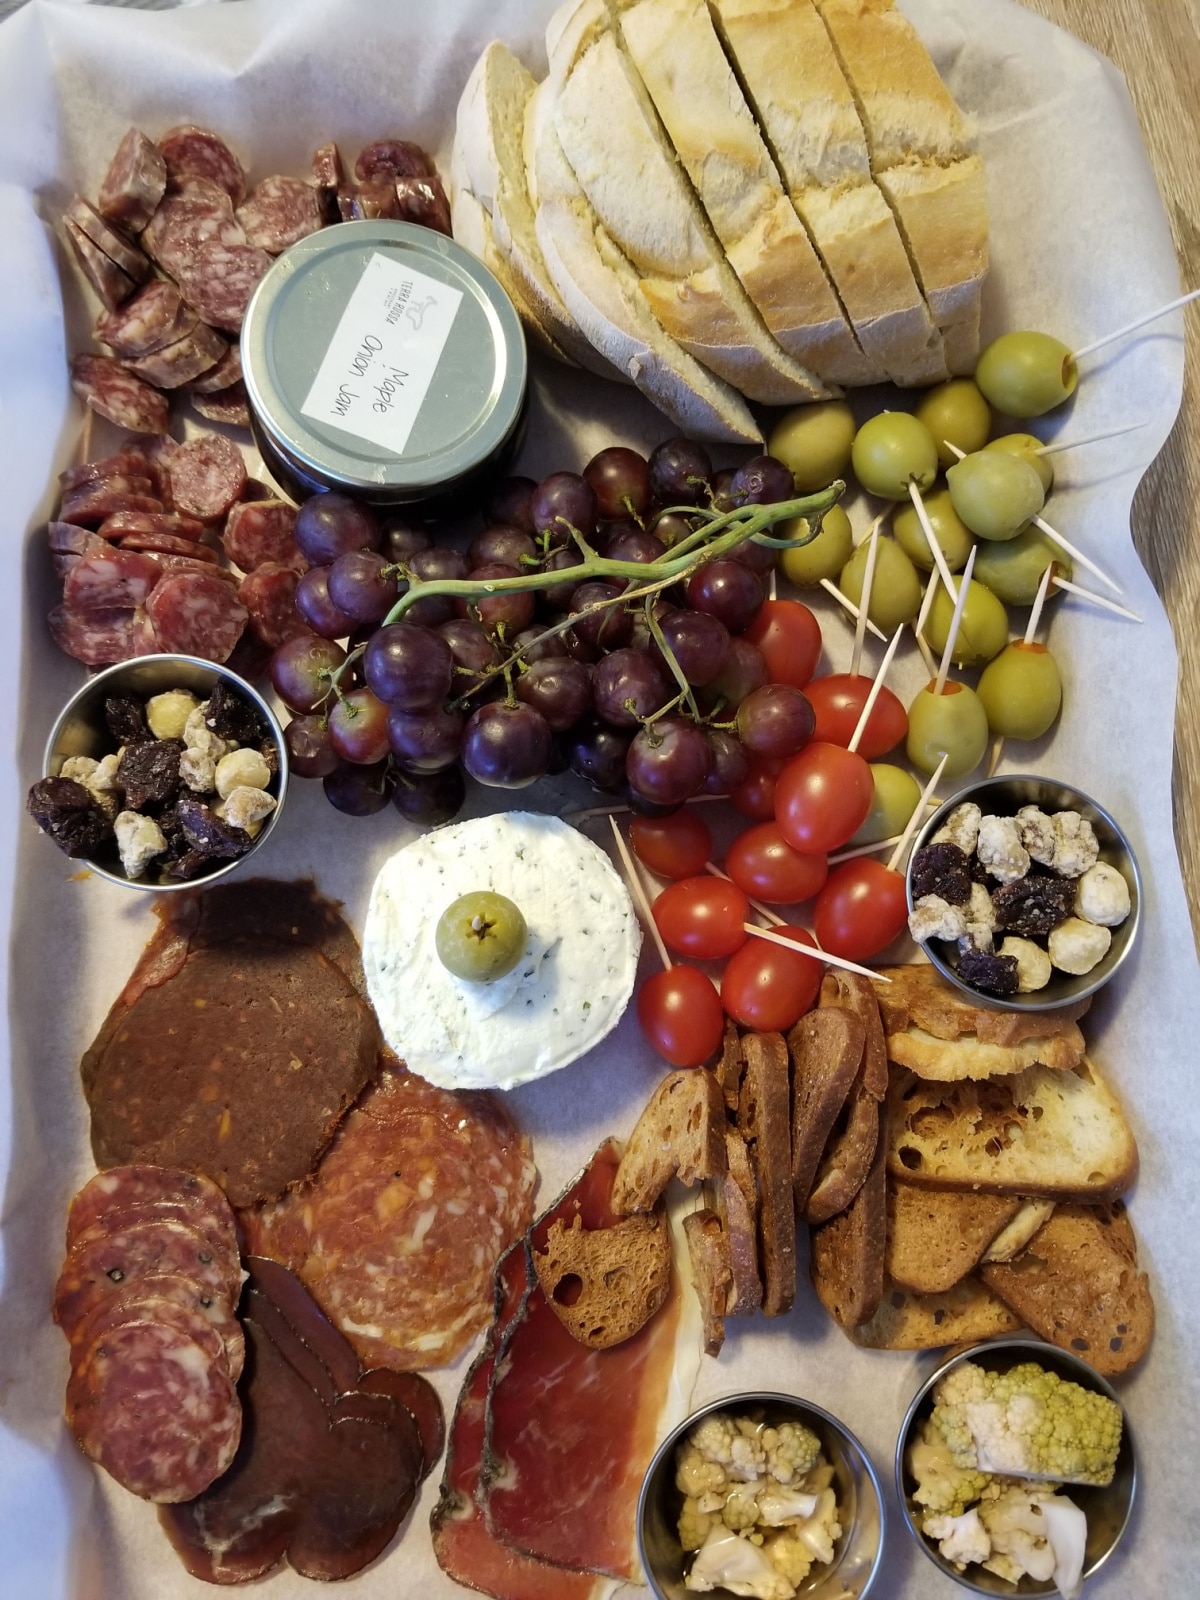 A charcuterie board full of green olives, grapes, cherry tomatoes, cheese, meats, sliced bread, little dishes of nuts and raisins and a little jar of maple onion jam.